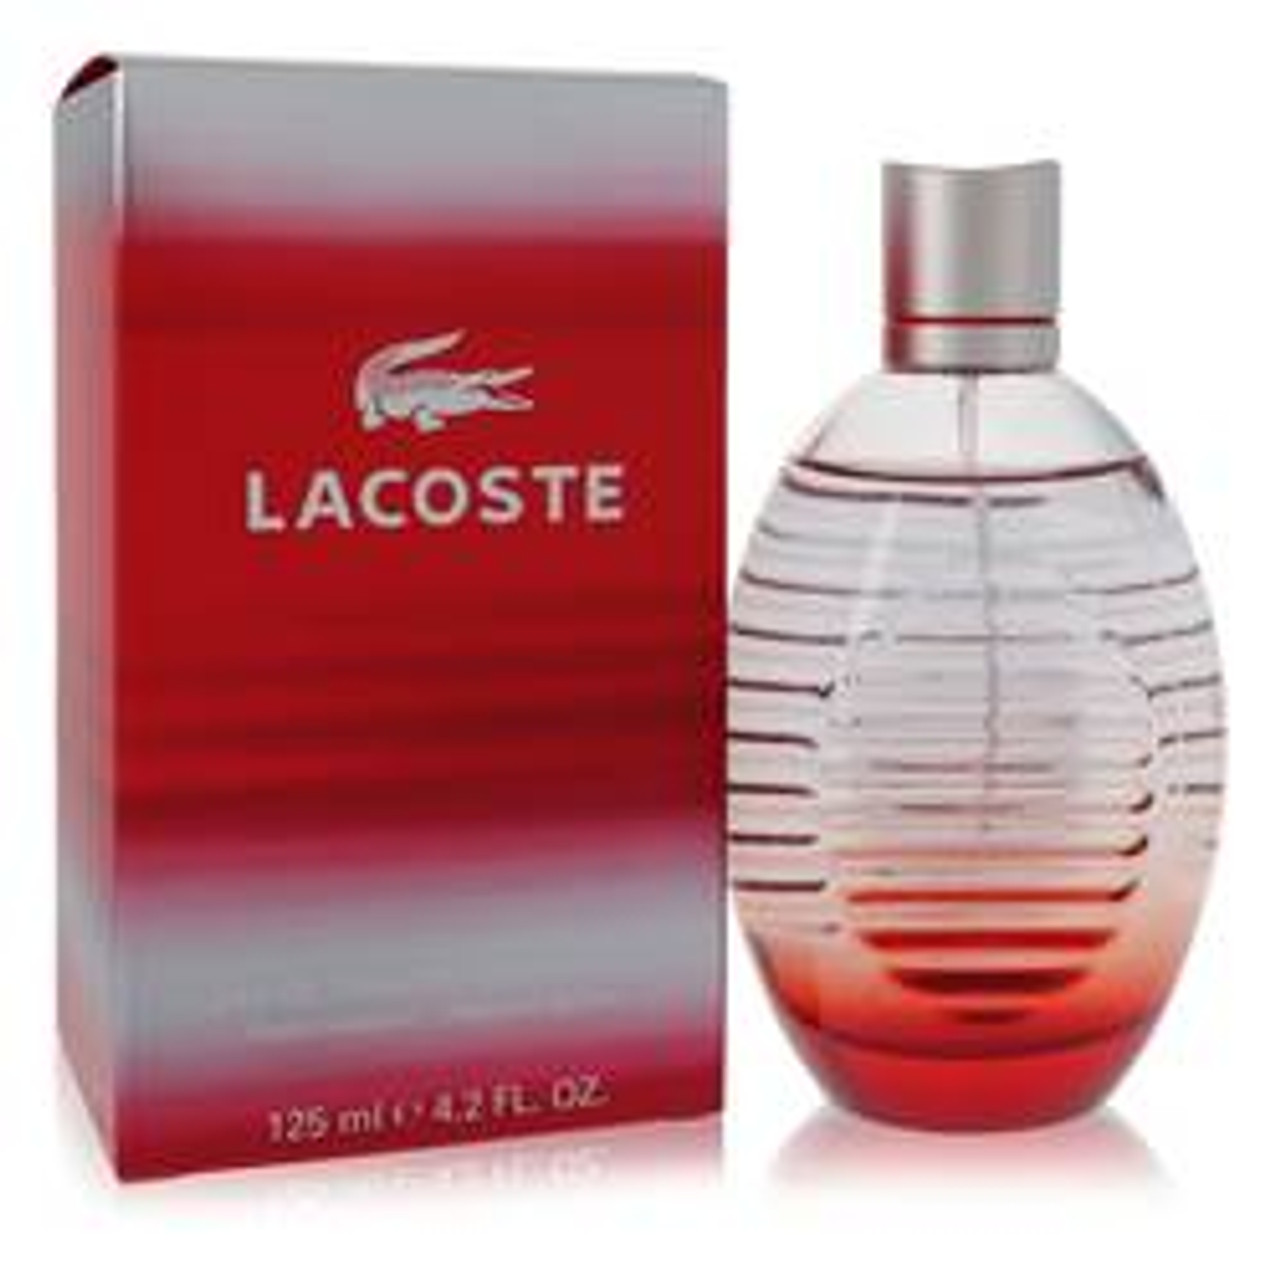 Lacoste Red Style In Play Cologne By Lacoste Eau De Toilette Spray (New Packaging) 4.2 oz for Men - *Pre-Order